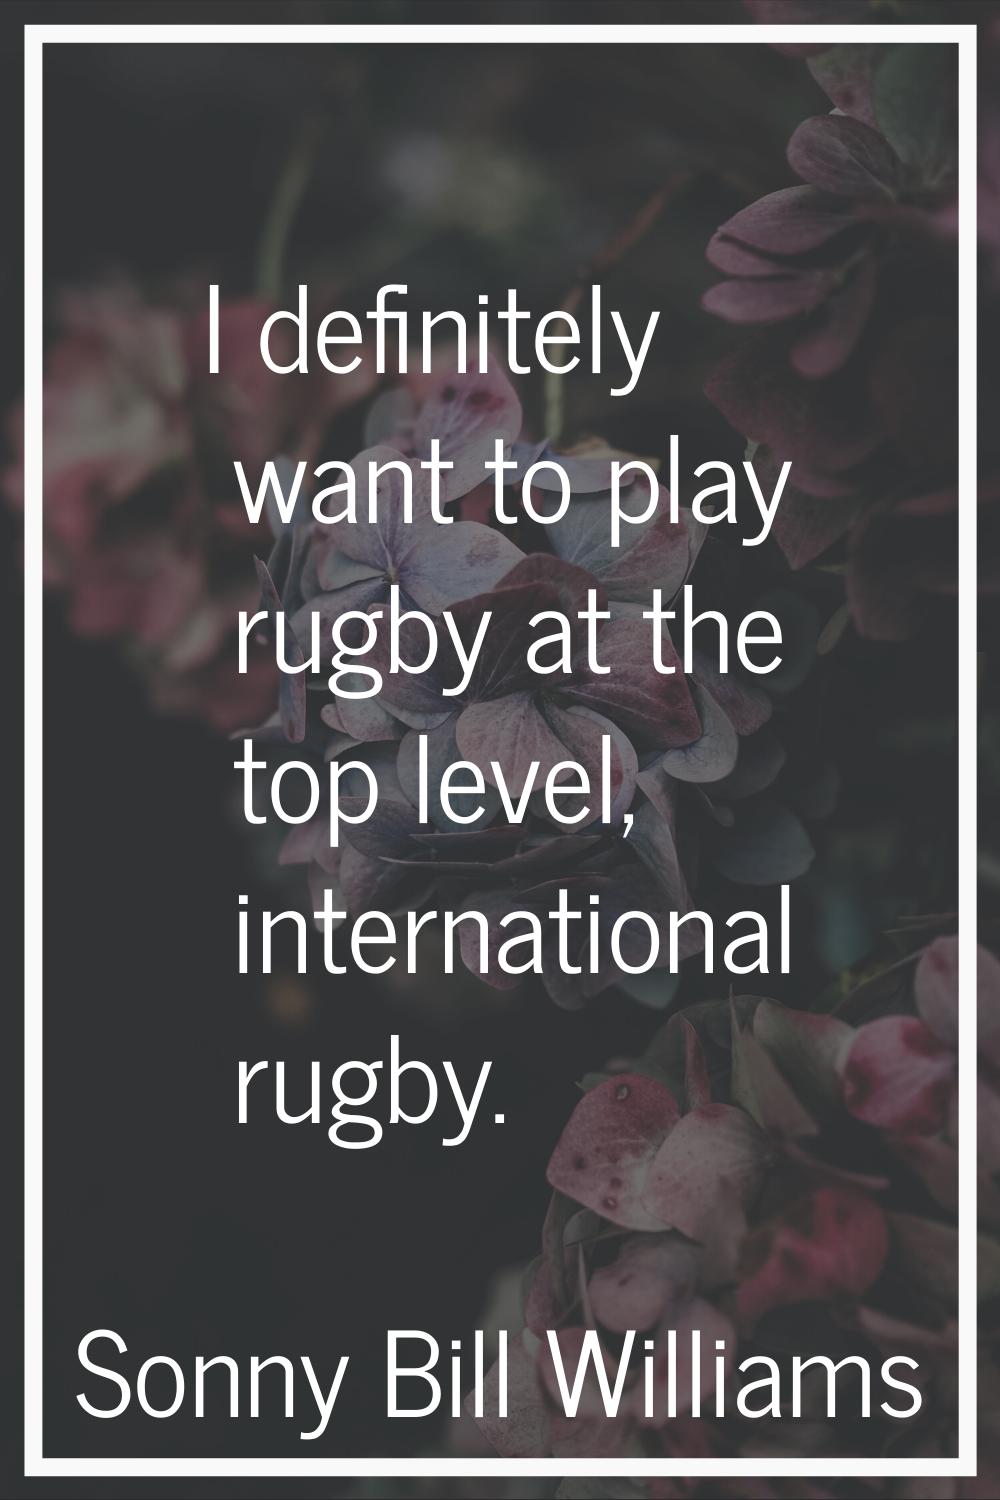 I definitely want to play rugby at the top level, international rugby.